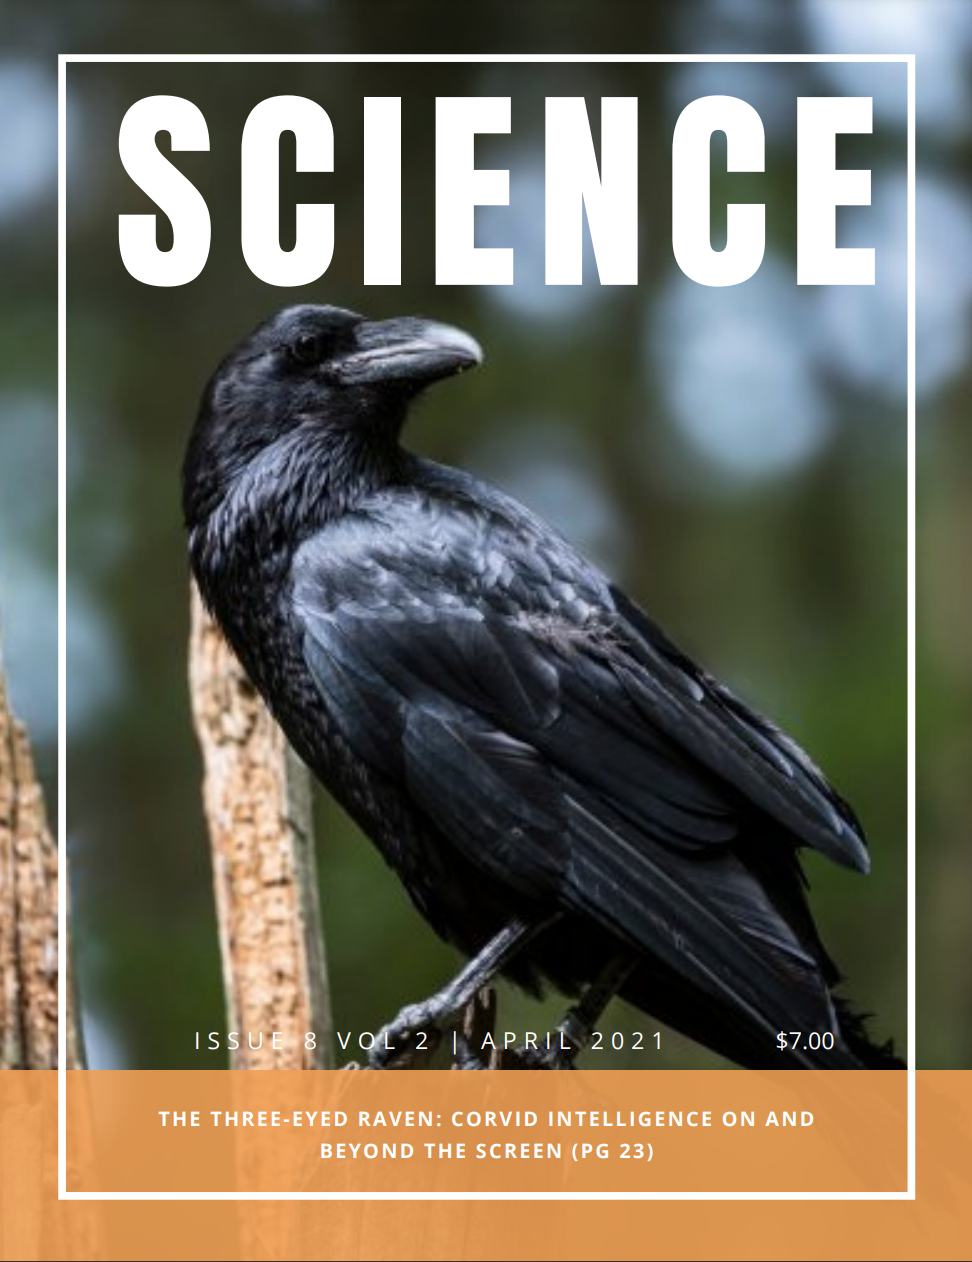 Magazing cover: Three-eyed raven with a photo of a raven